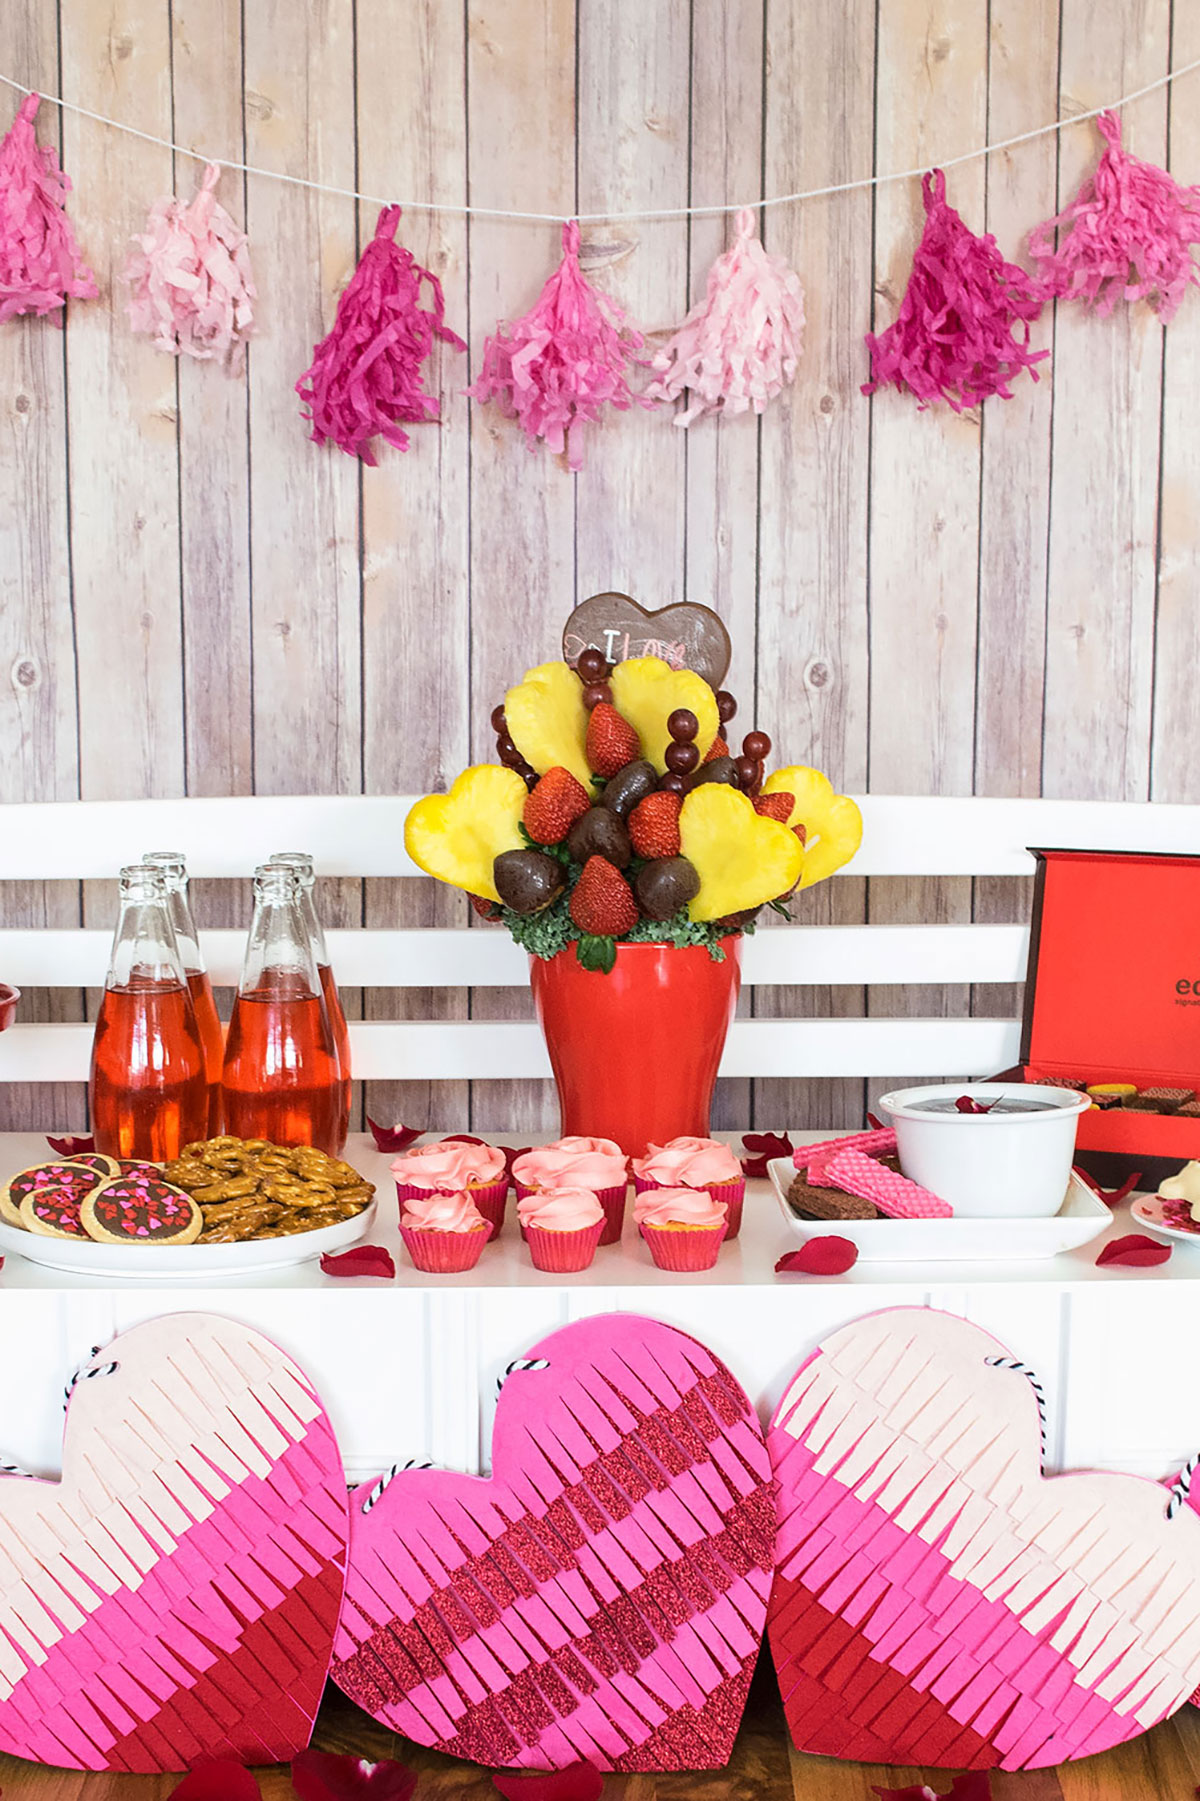 Valentine's day dinner table setting with roses and balloons  Valentine  table decorations, Romantic dinner setting, Romantic dinner decoration